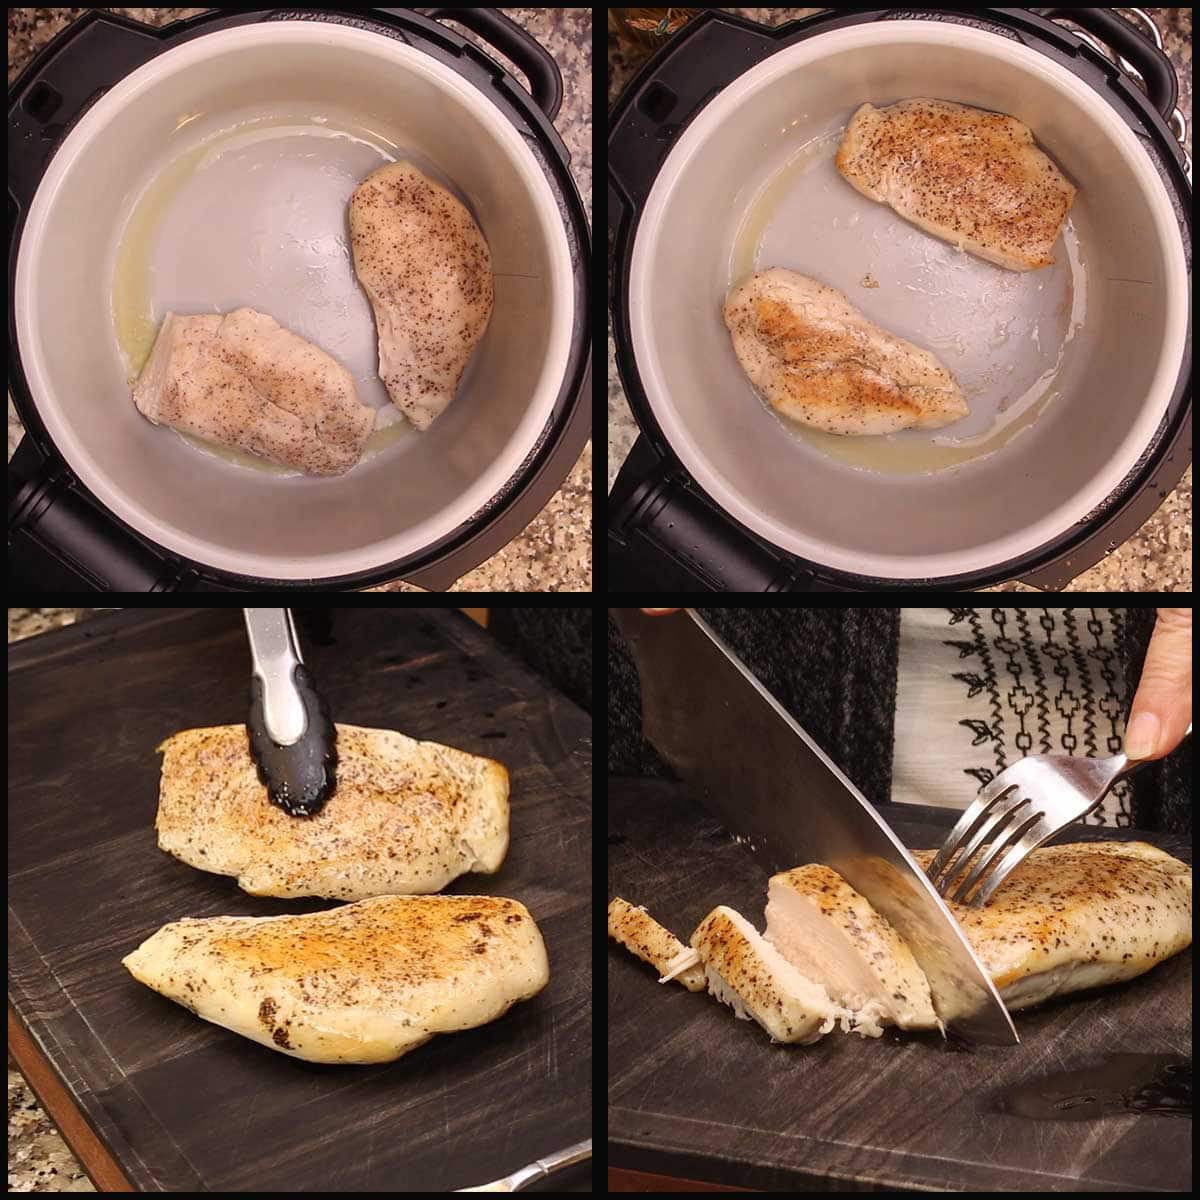 searing chicken breasts in inner pot after sous vide cooking and slicing to serve